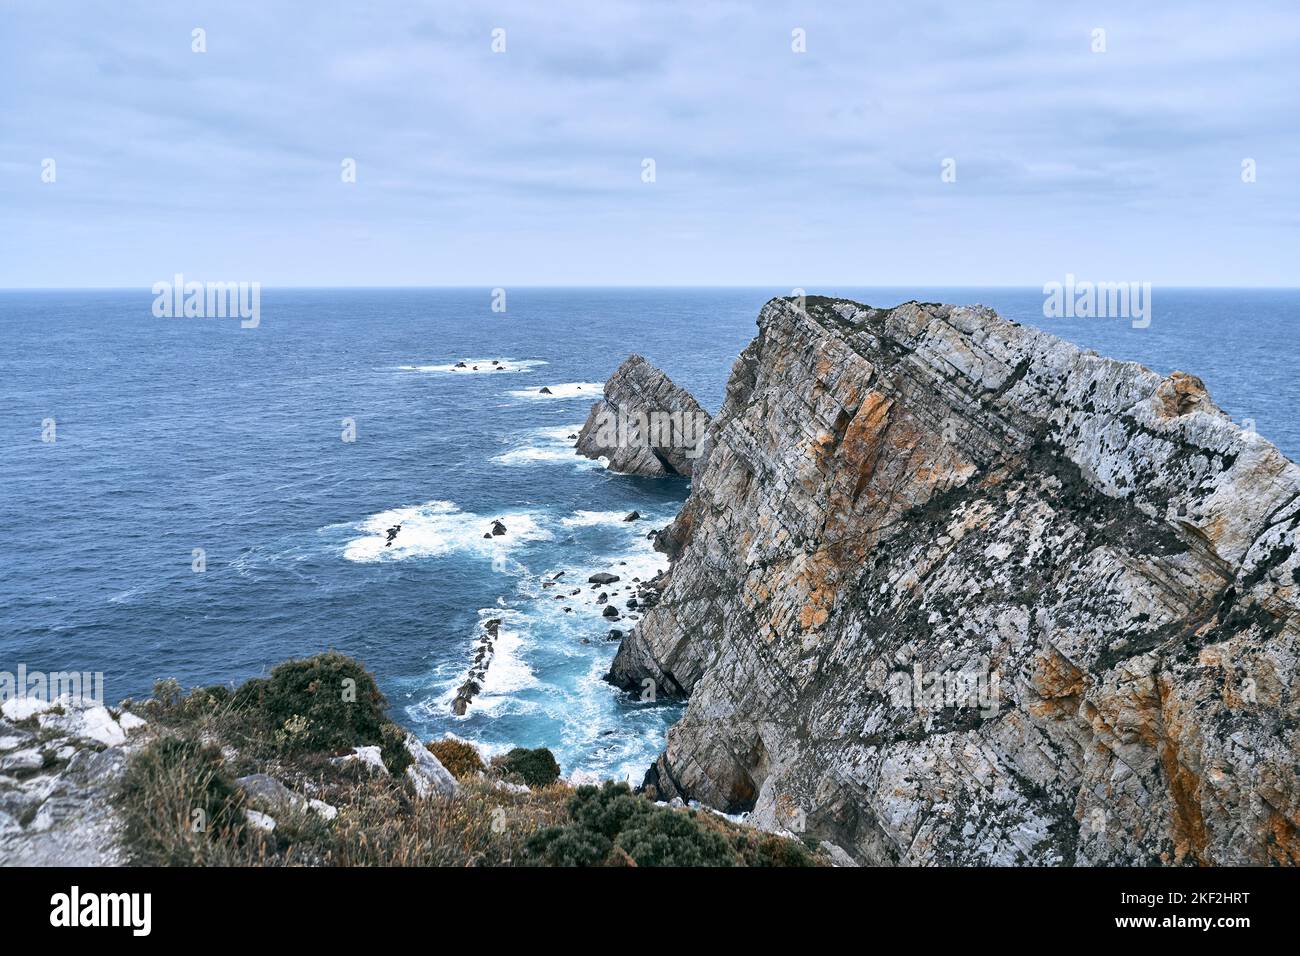 cliff with big rocks on the lonely coast by the sea in a calm place a cloudy day, cabo de penas, spain Stock Photo